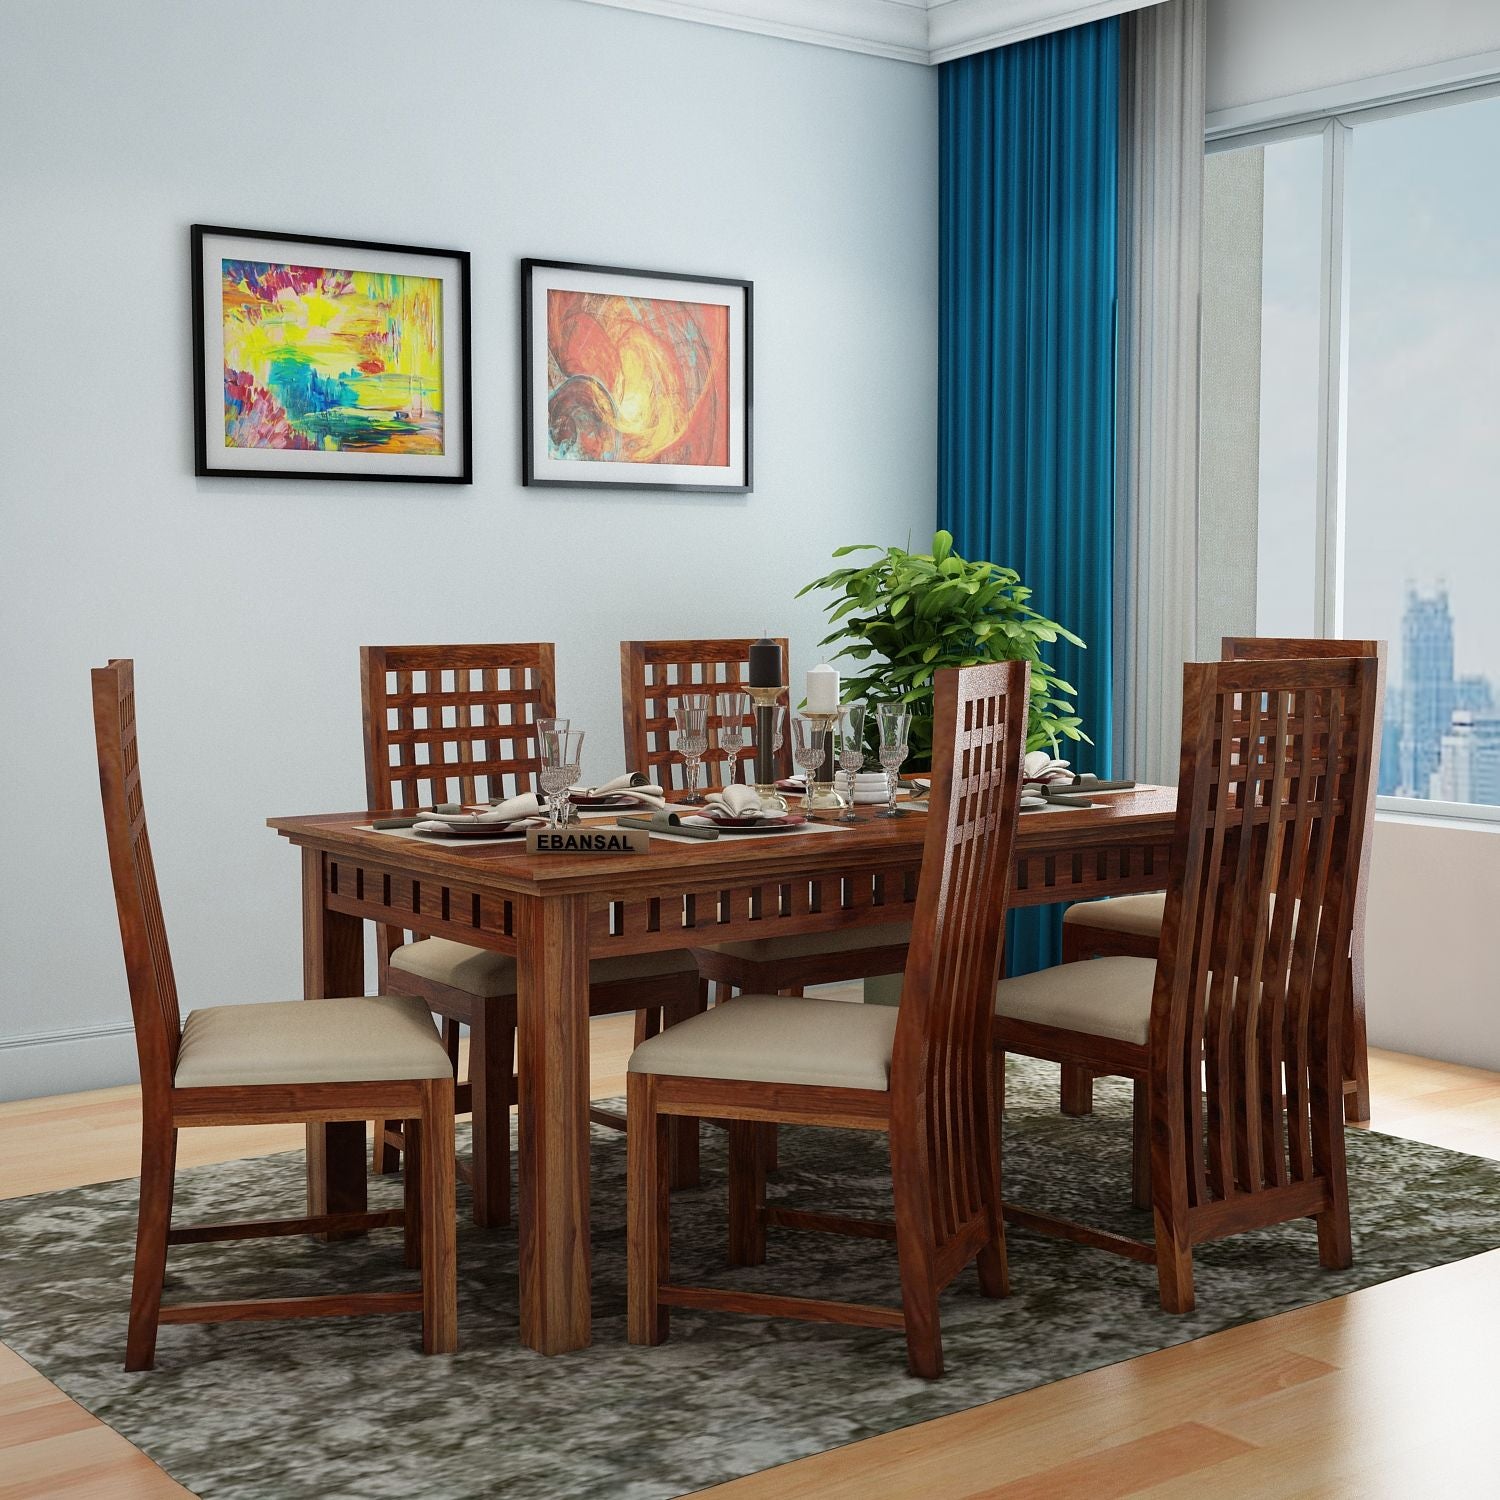 Amer Solid Sheesham Wood 6 Seater Dining Set (With Cushion, Natural Finish)